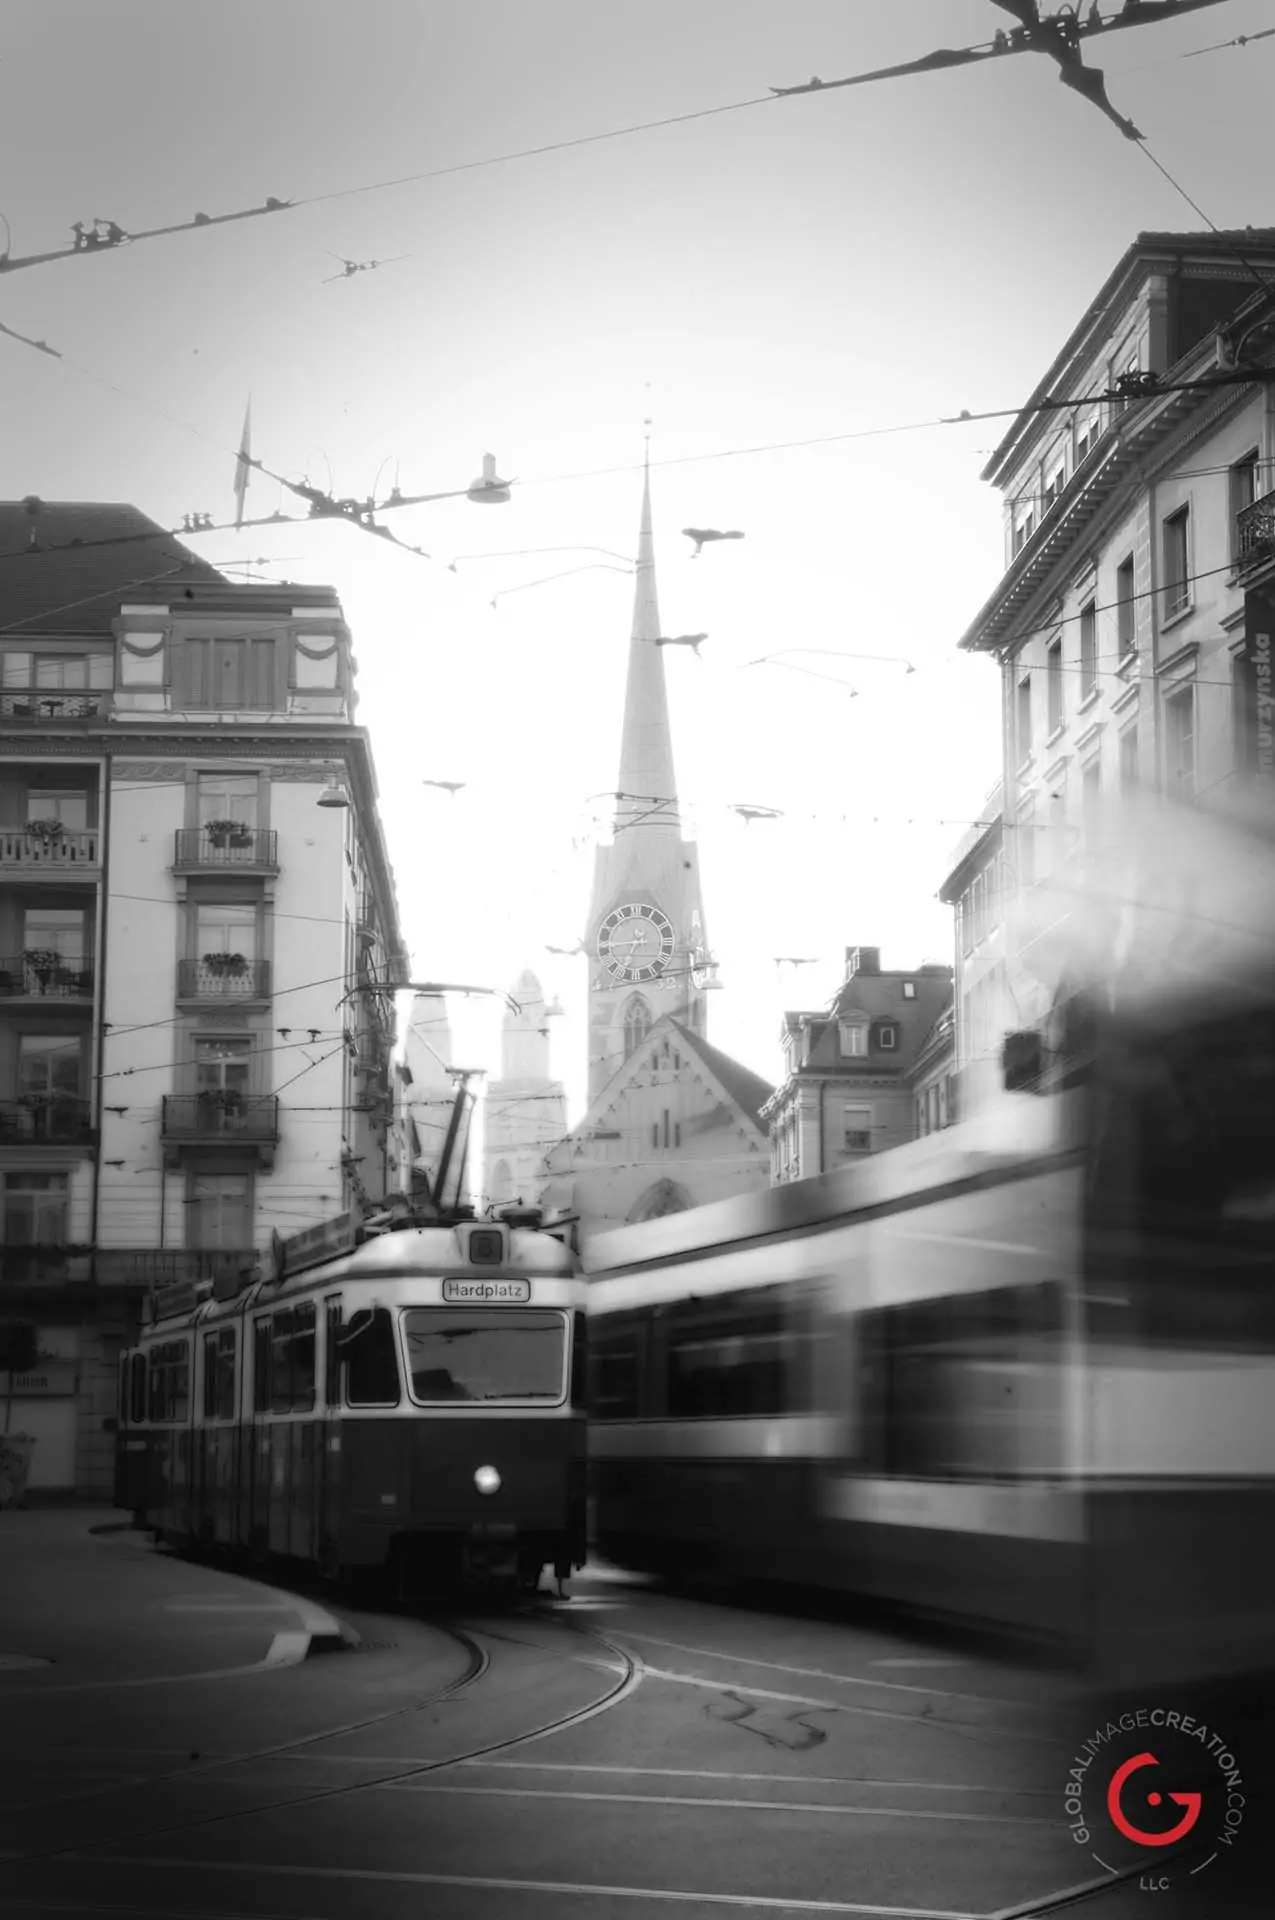 Trams in Zurich - Travel Photographer and Switzerland Photography